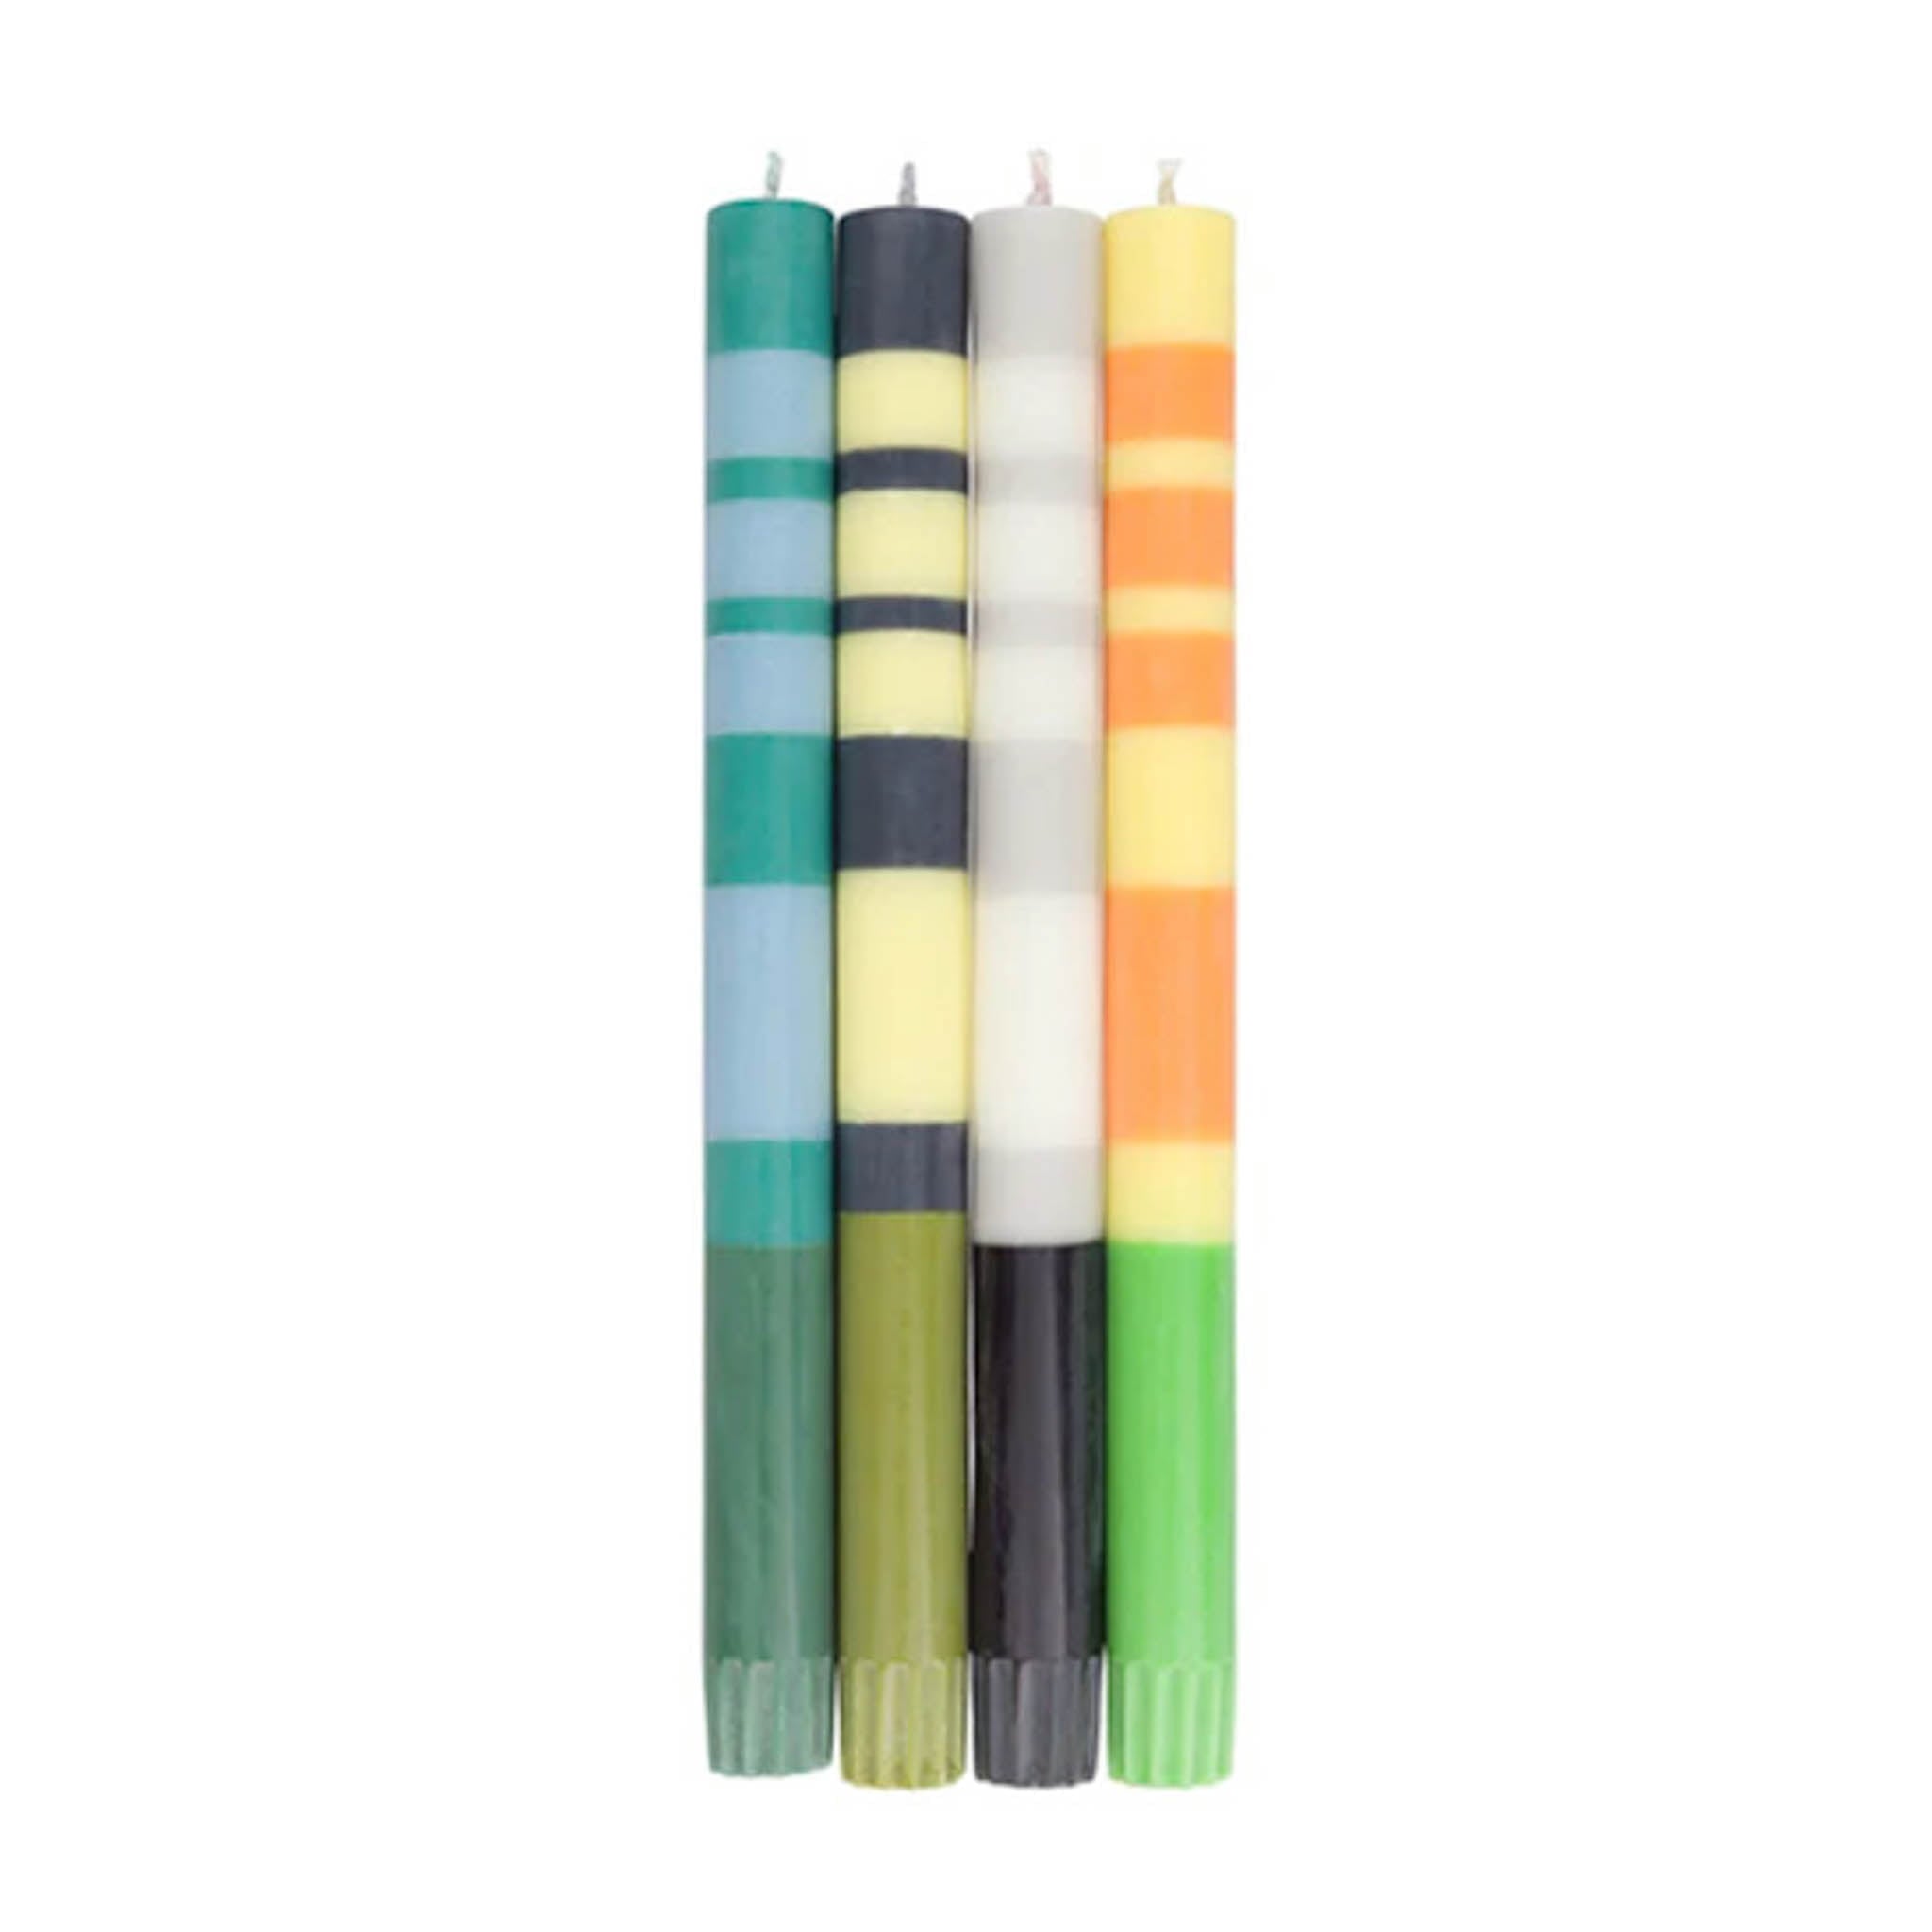 Set of 4 Striped Candles, Greens & Yellows